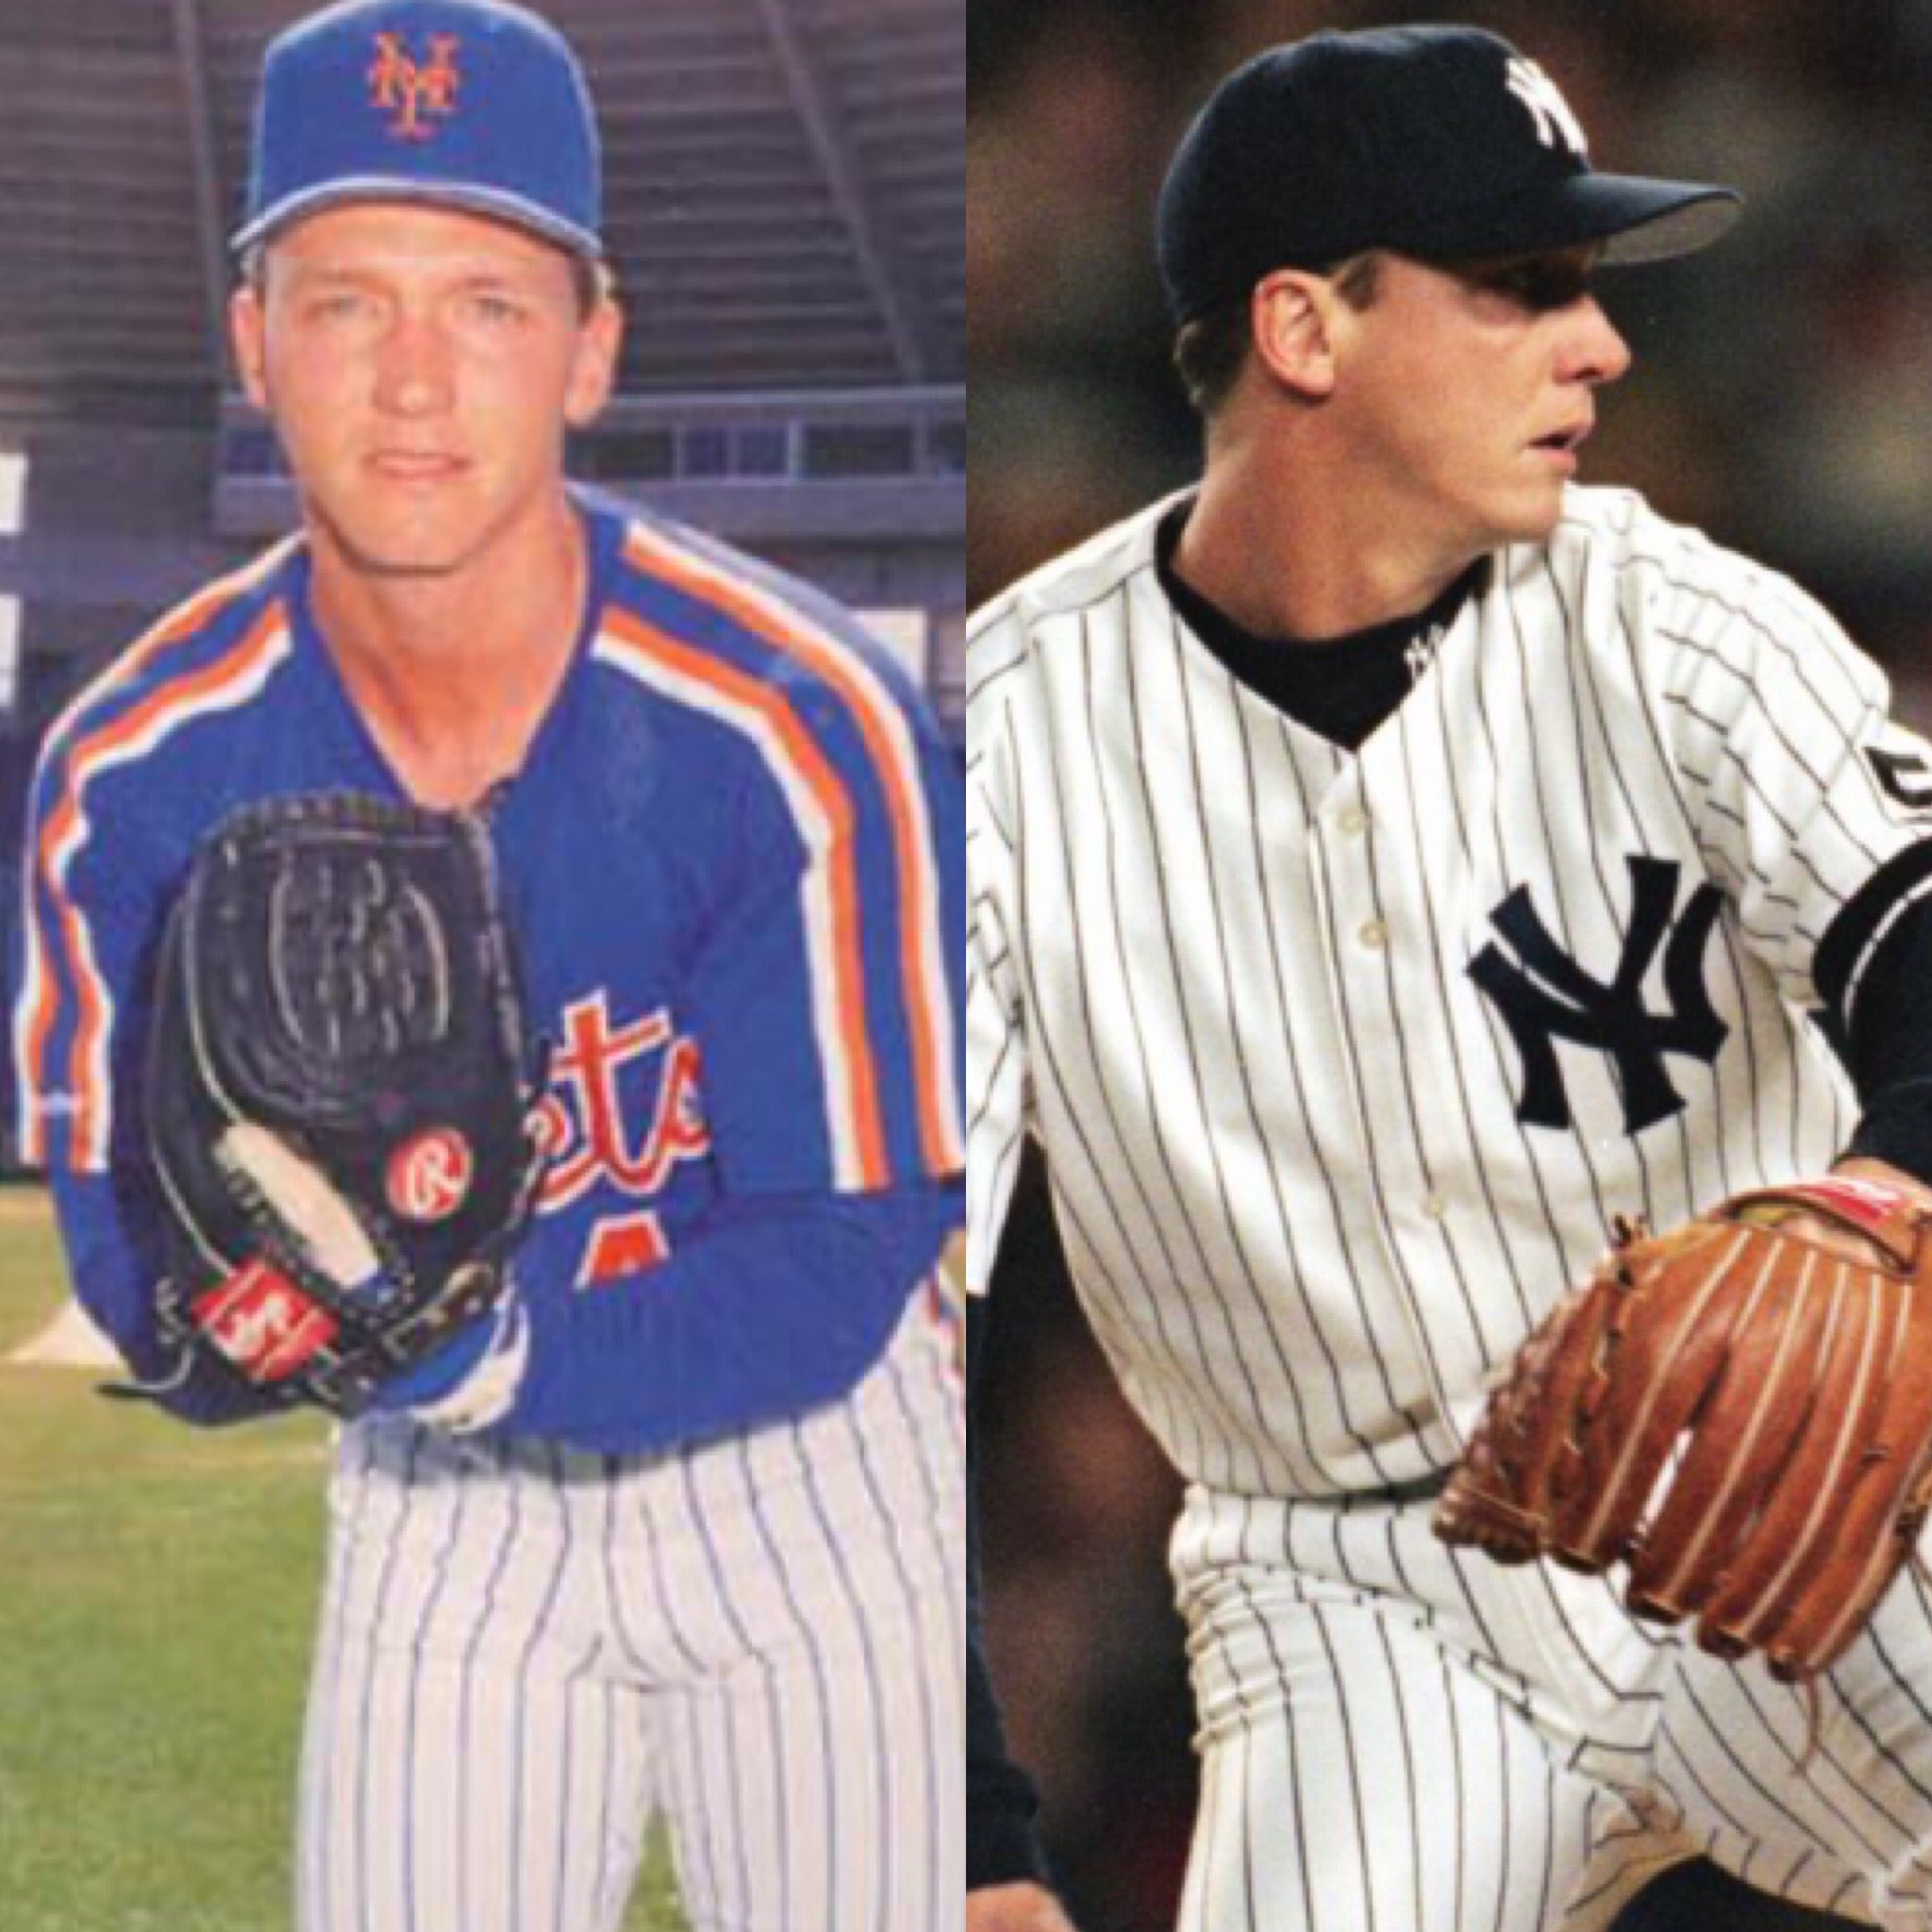 Happy birthday to David Cone, one of the few players to star with both the Mets and the Yankees 